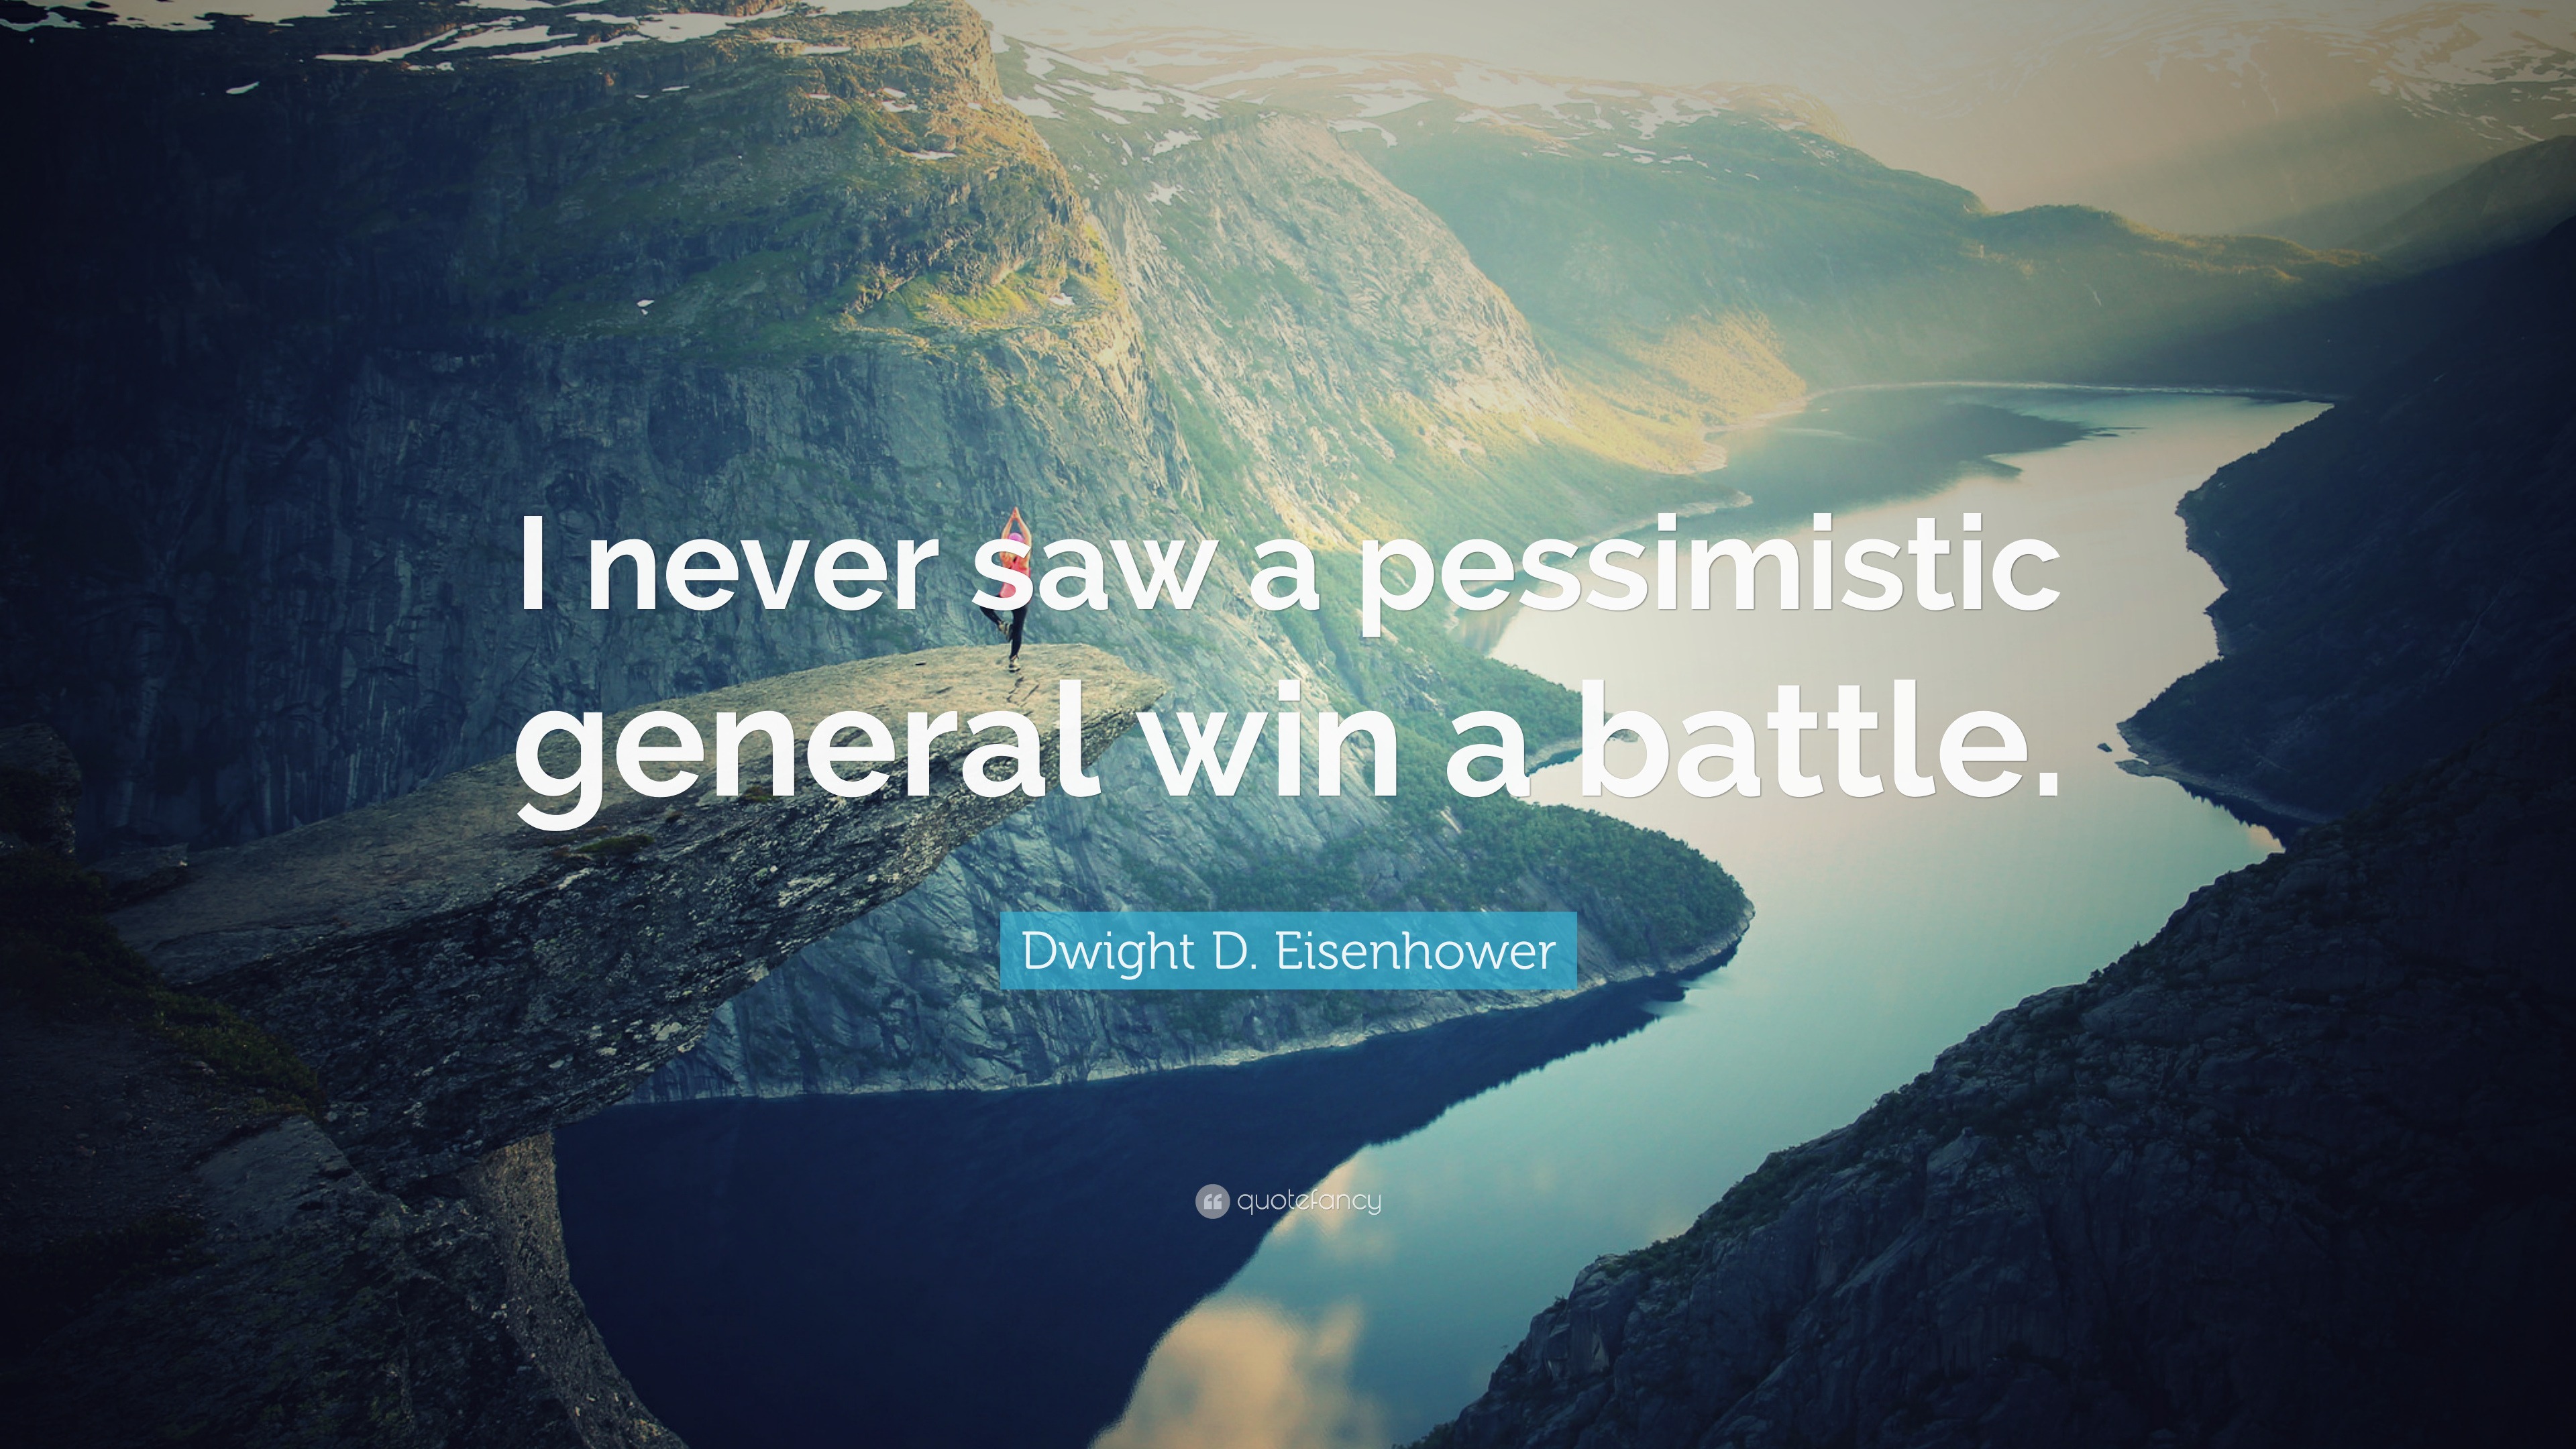 Dwight D. Eisenhower Quote: “I never saw a pessimistic general win a ...